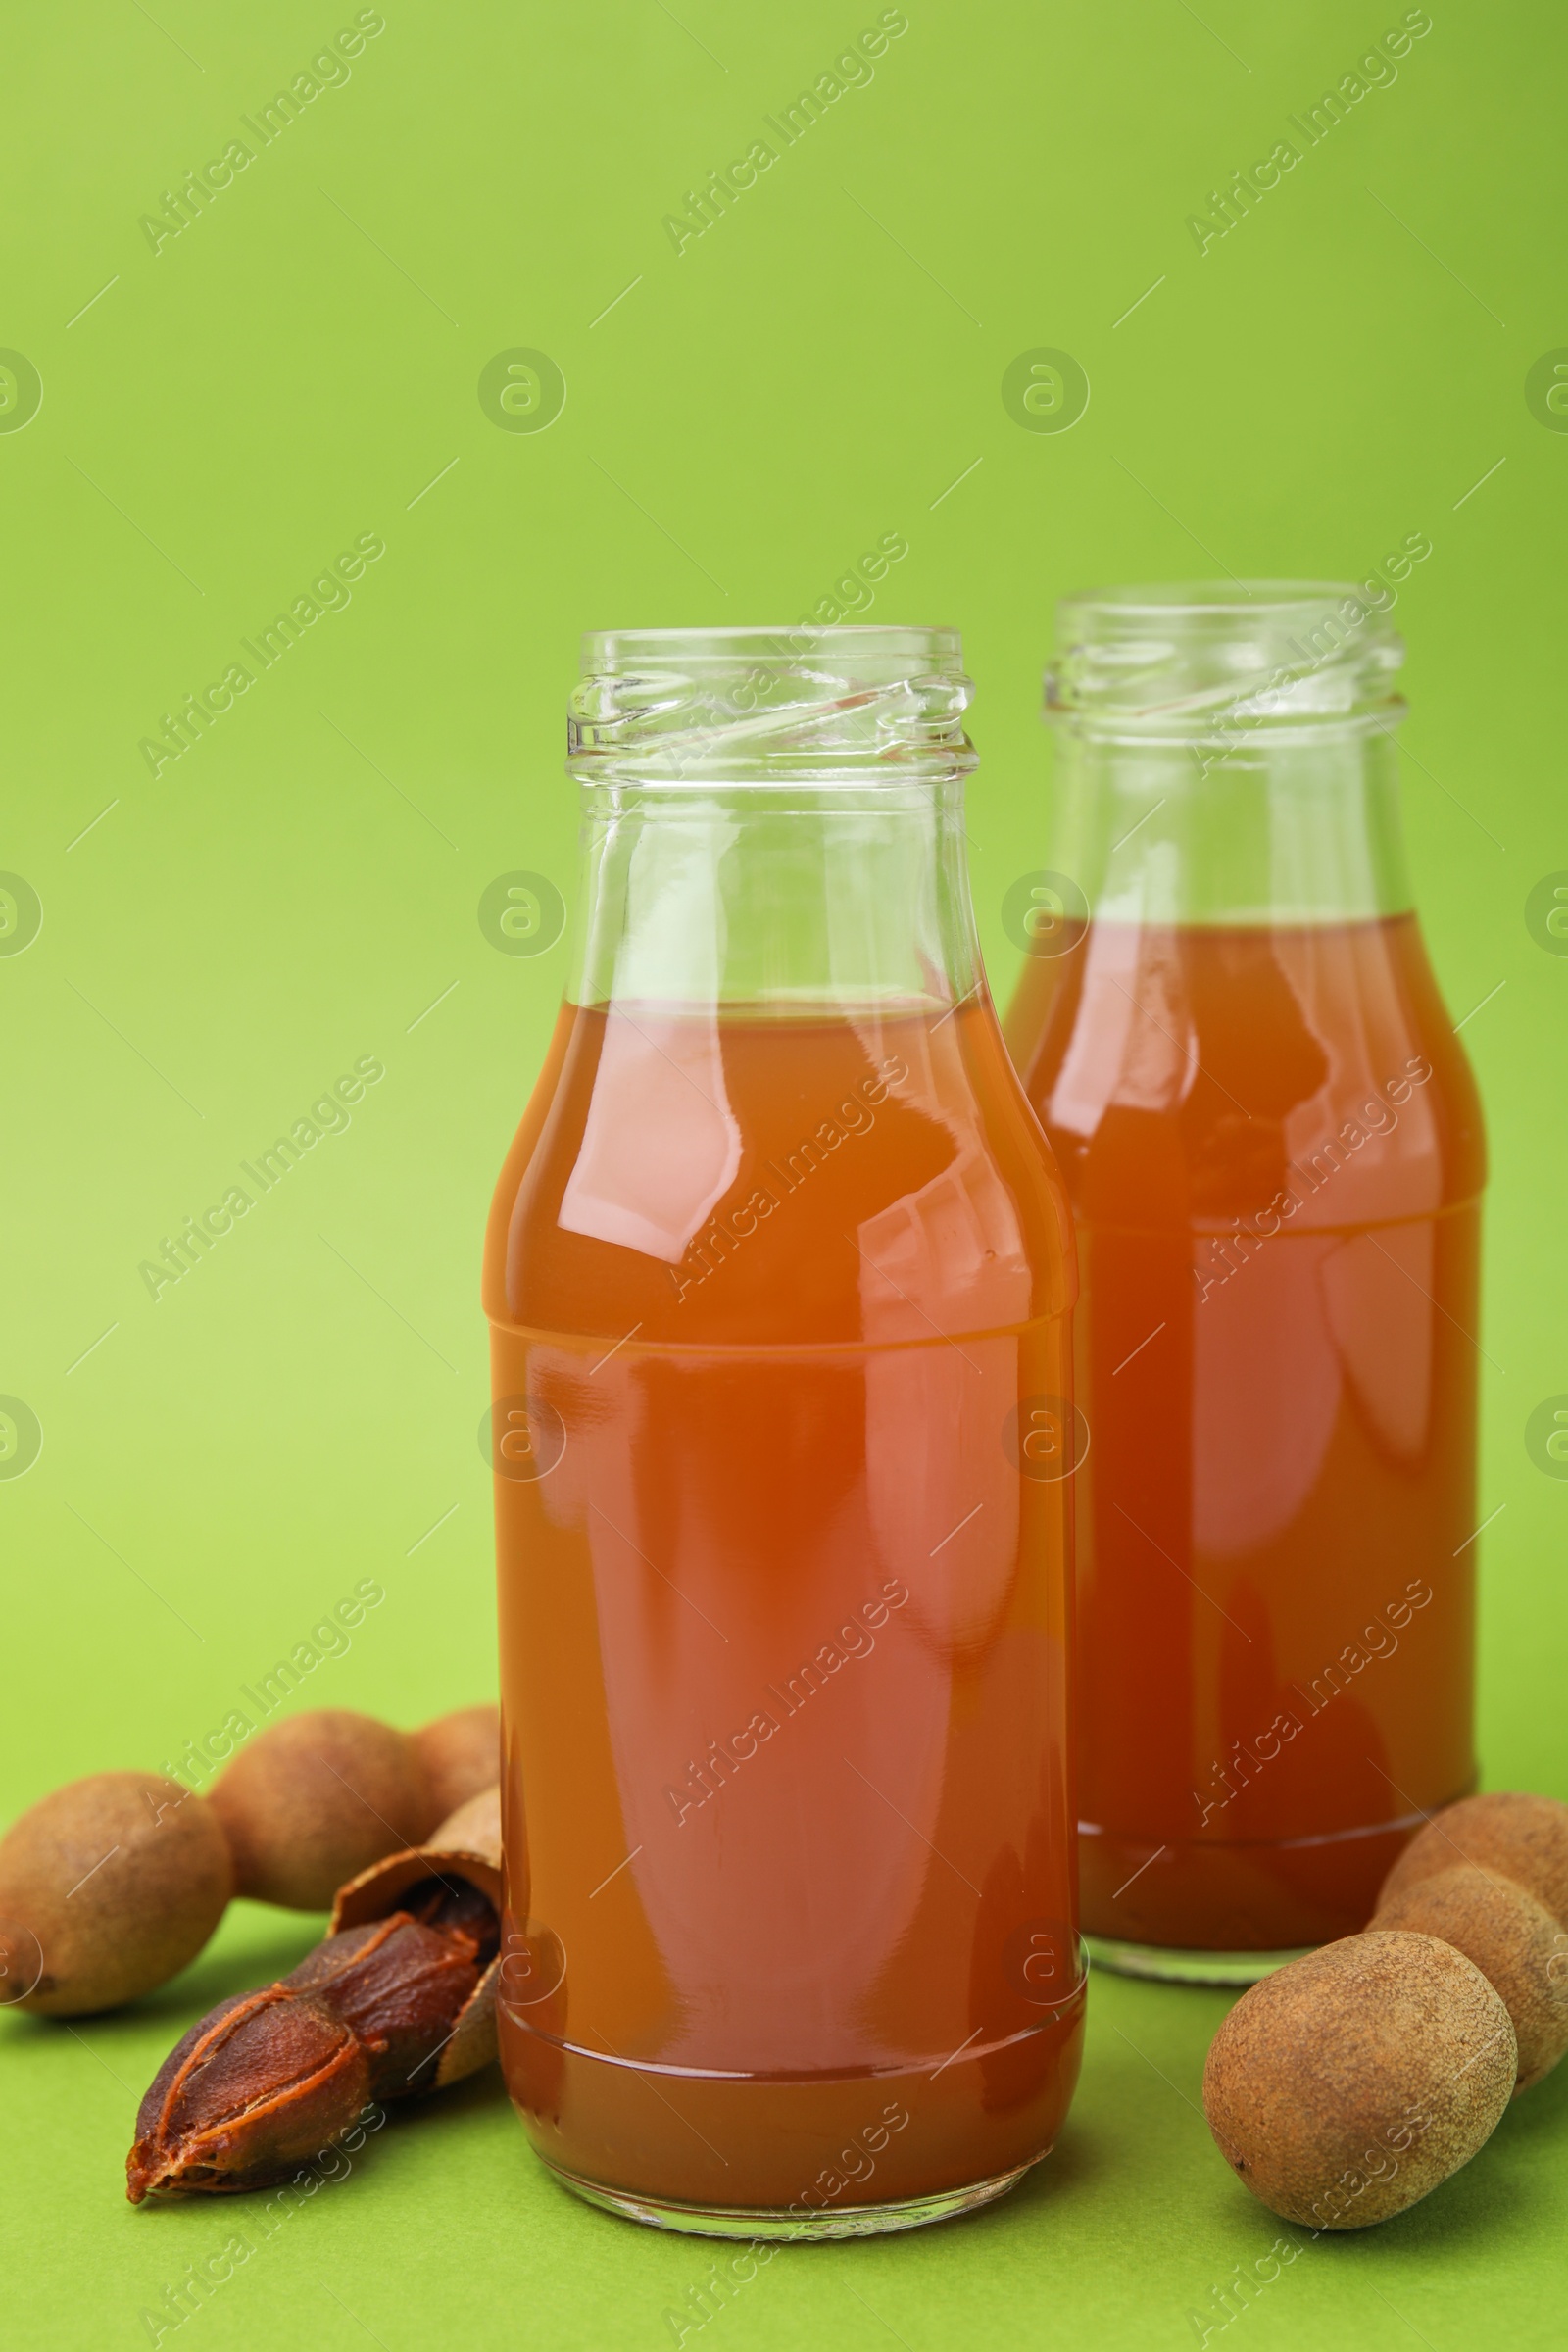 Photo of Tamarind juice and fresh fruits on green background